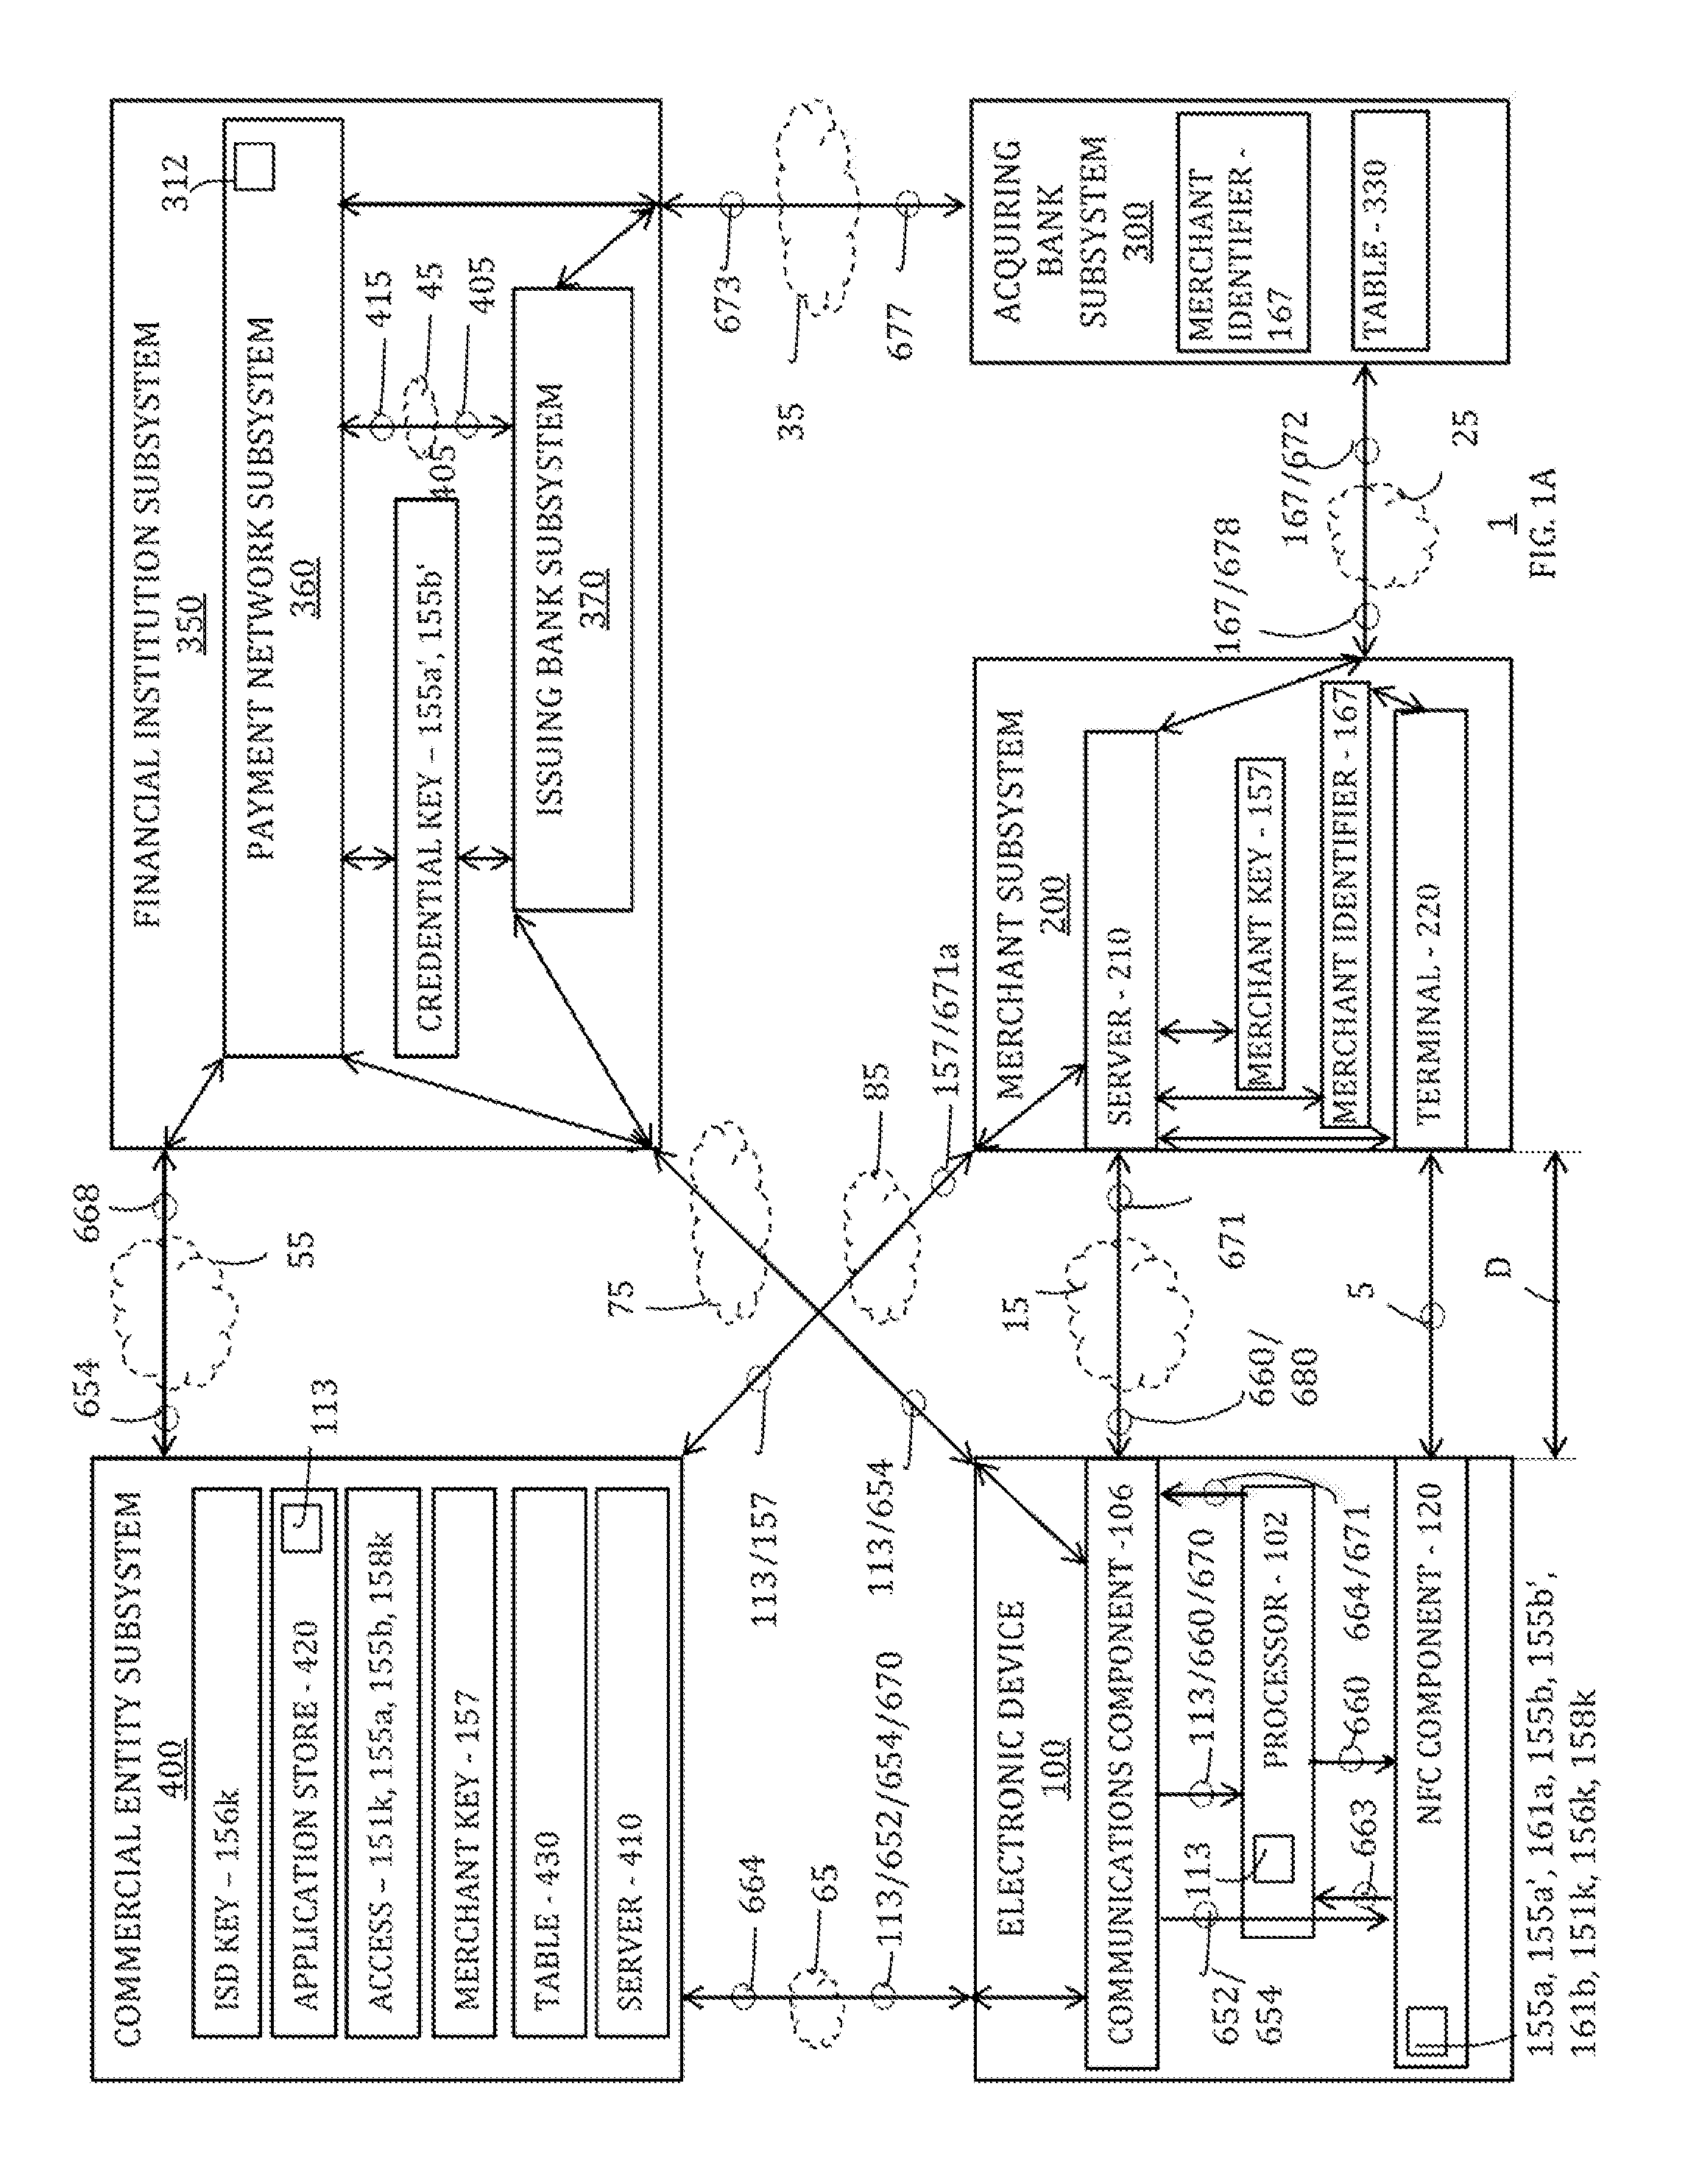 Multi-path communication of electronic device secure element data for online payments